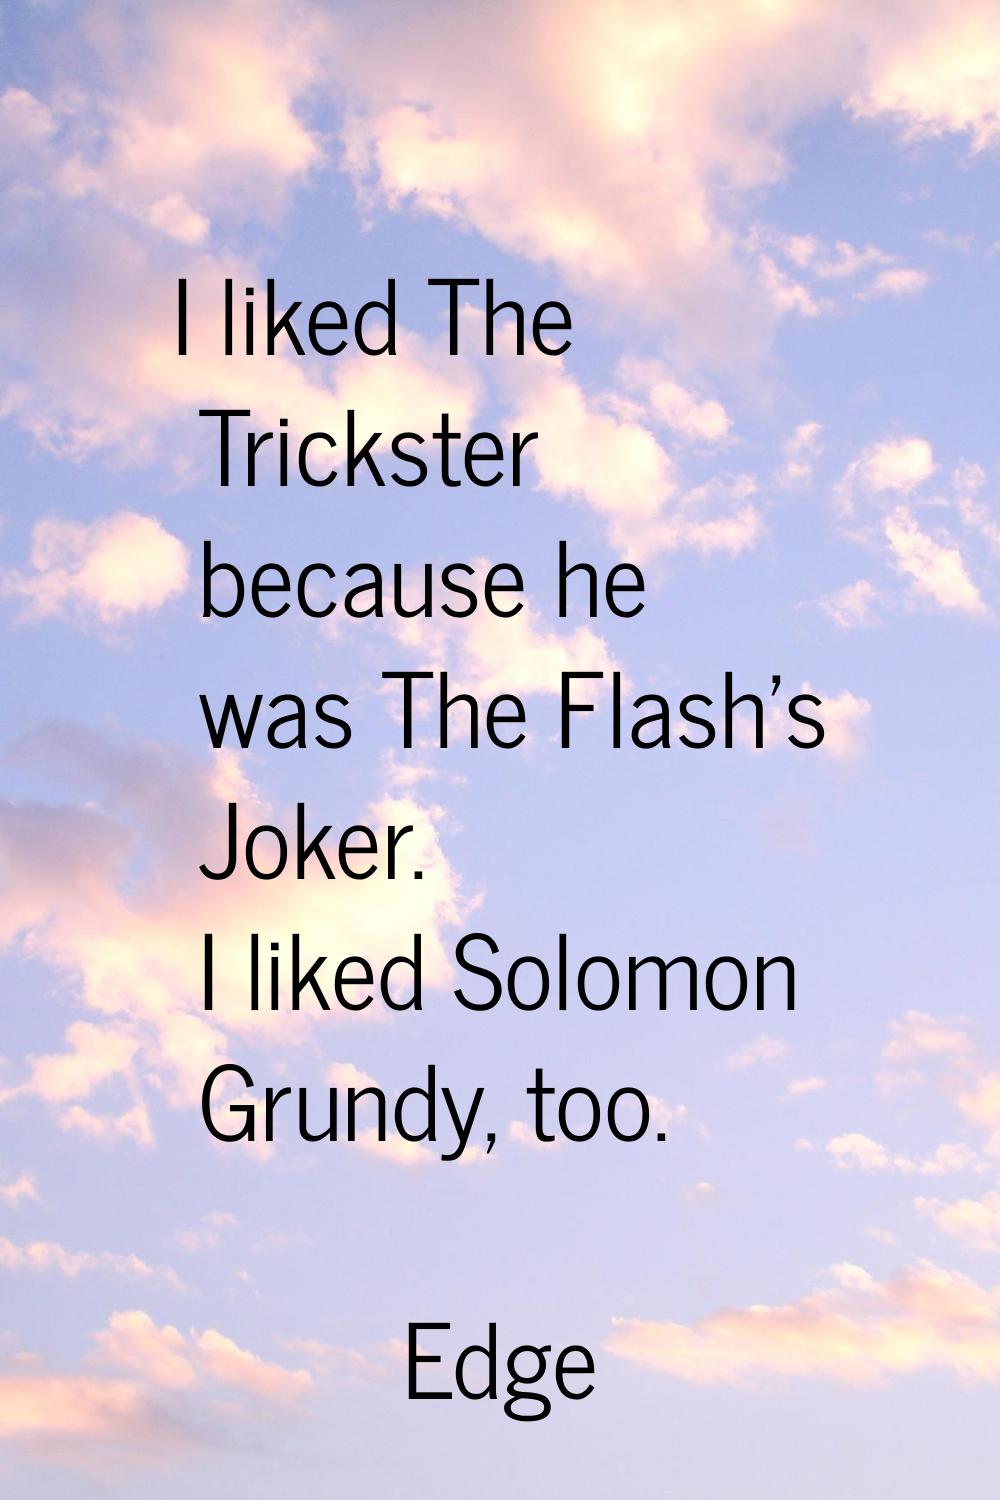 I liked The Trickster because he was The Flash's Joker. I liked Solomon Grundy, too.